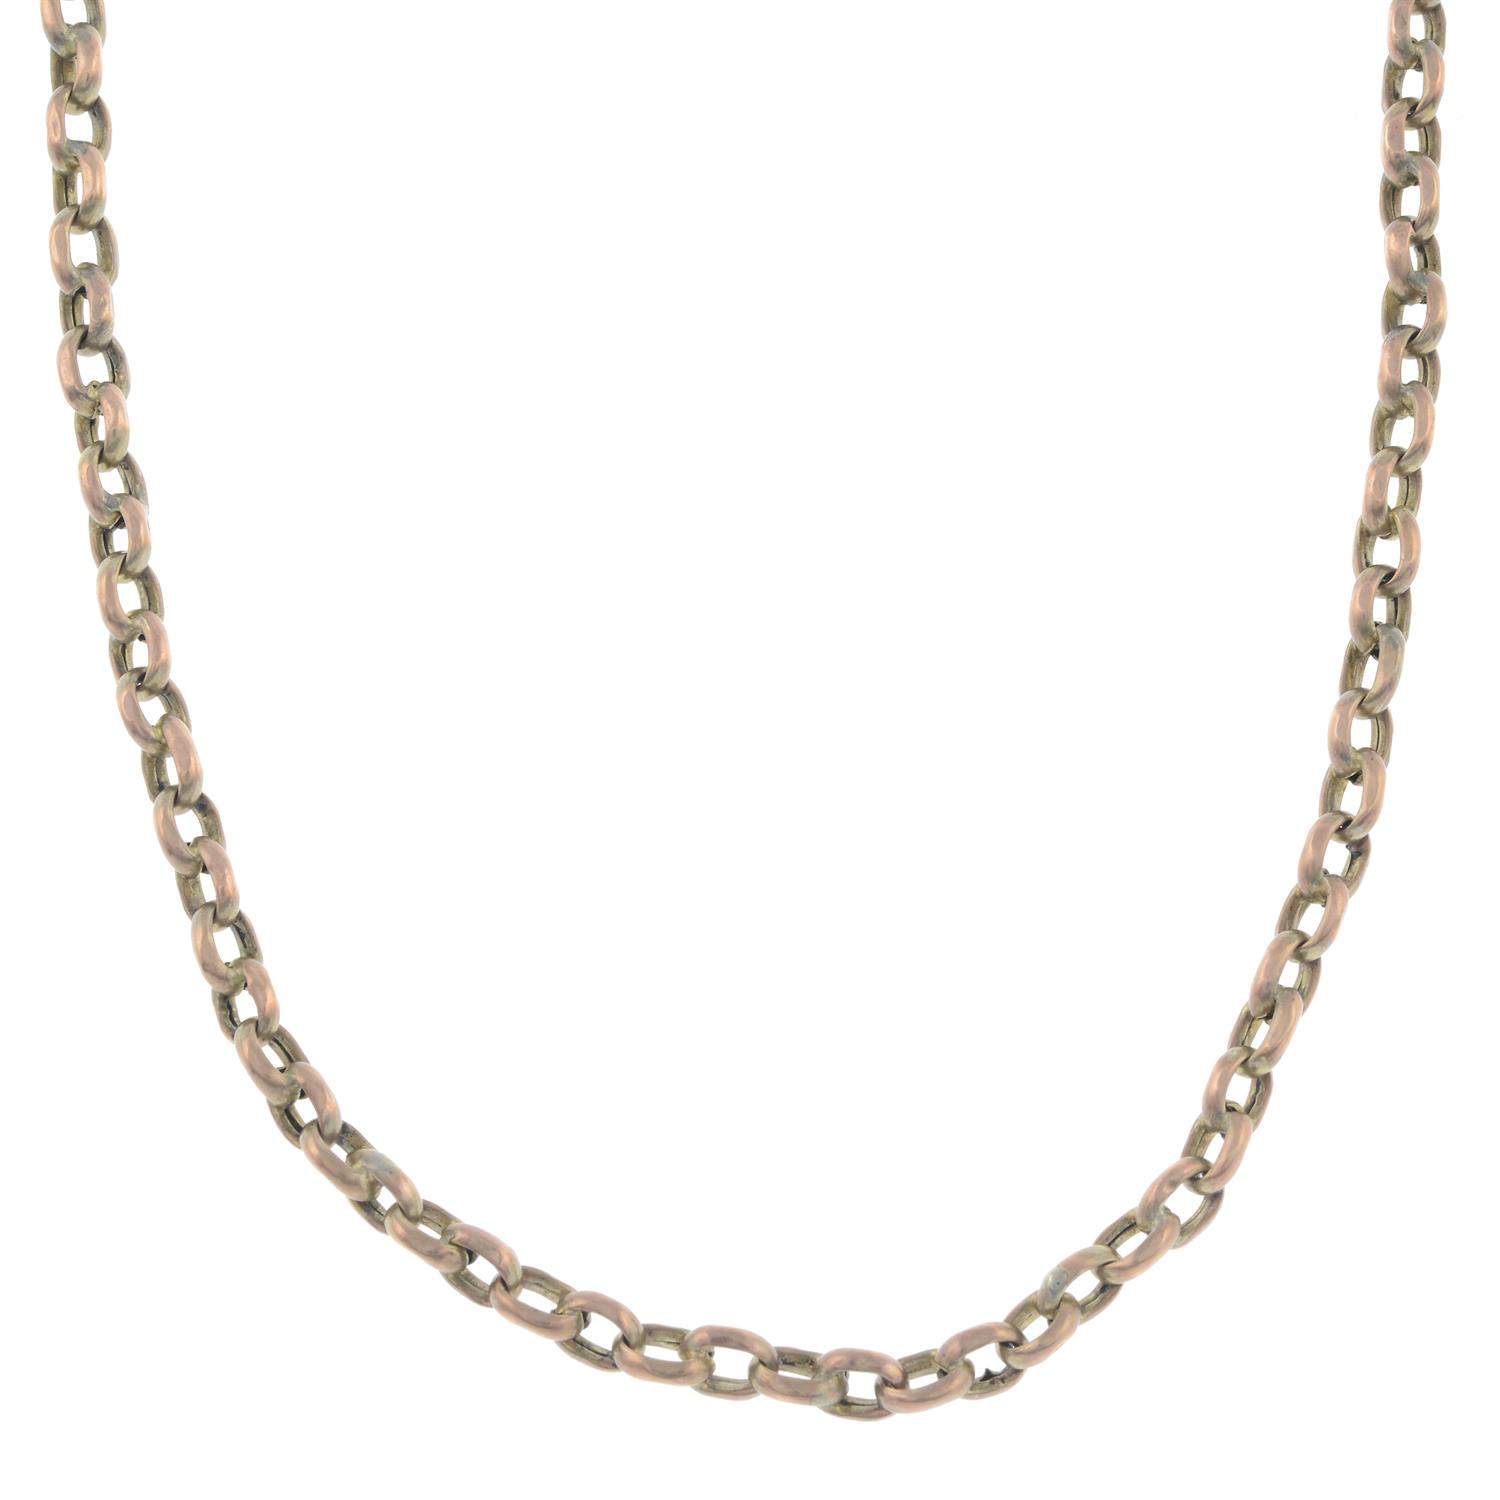 An early 20th century 9ct gold belcher-link necklace.